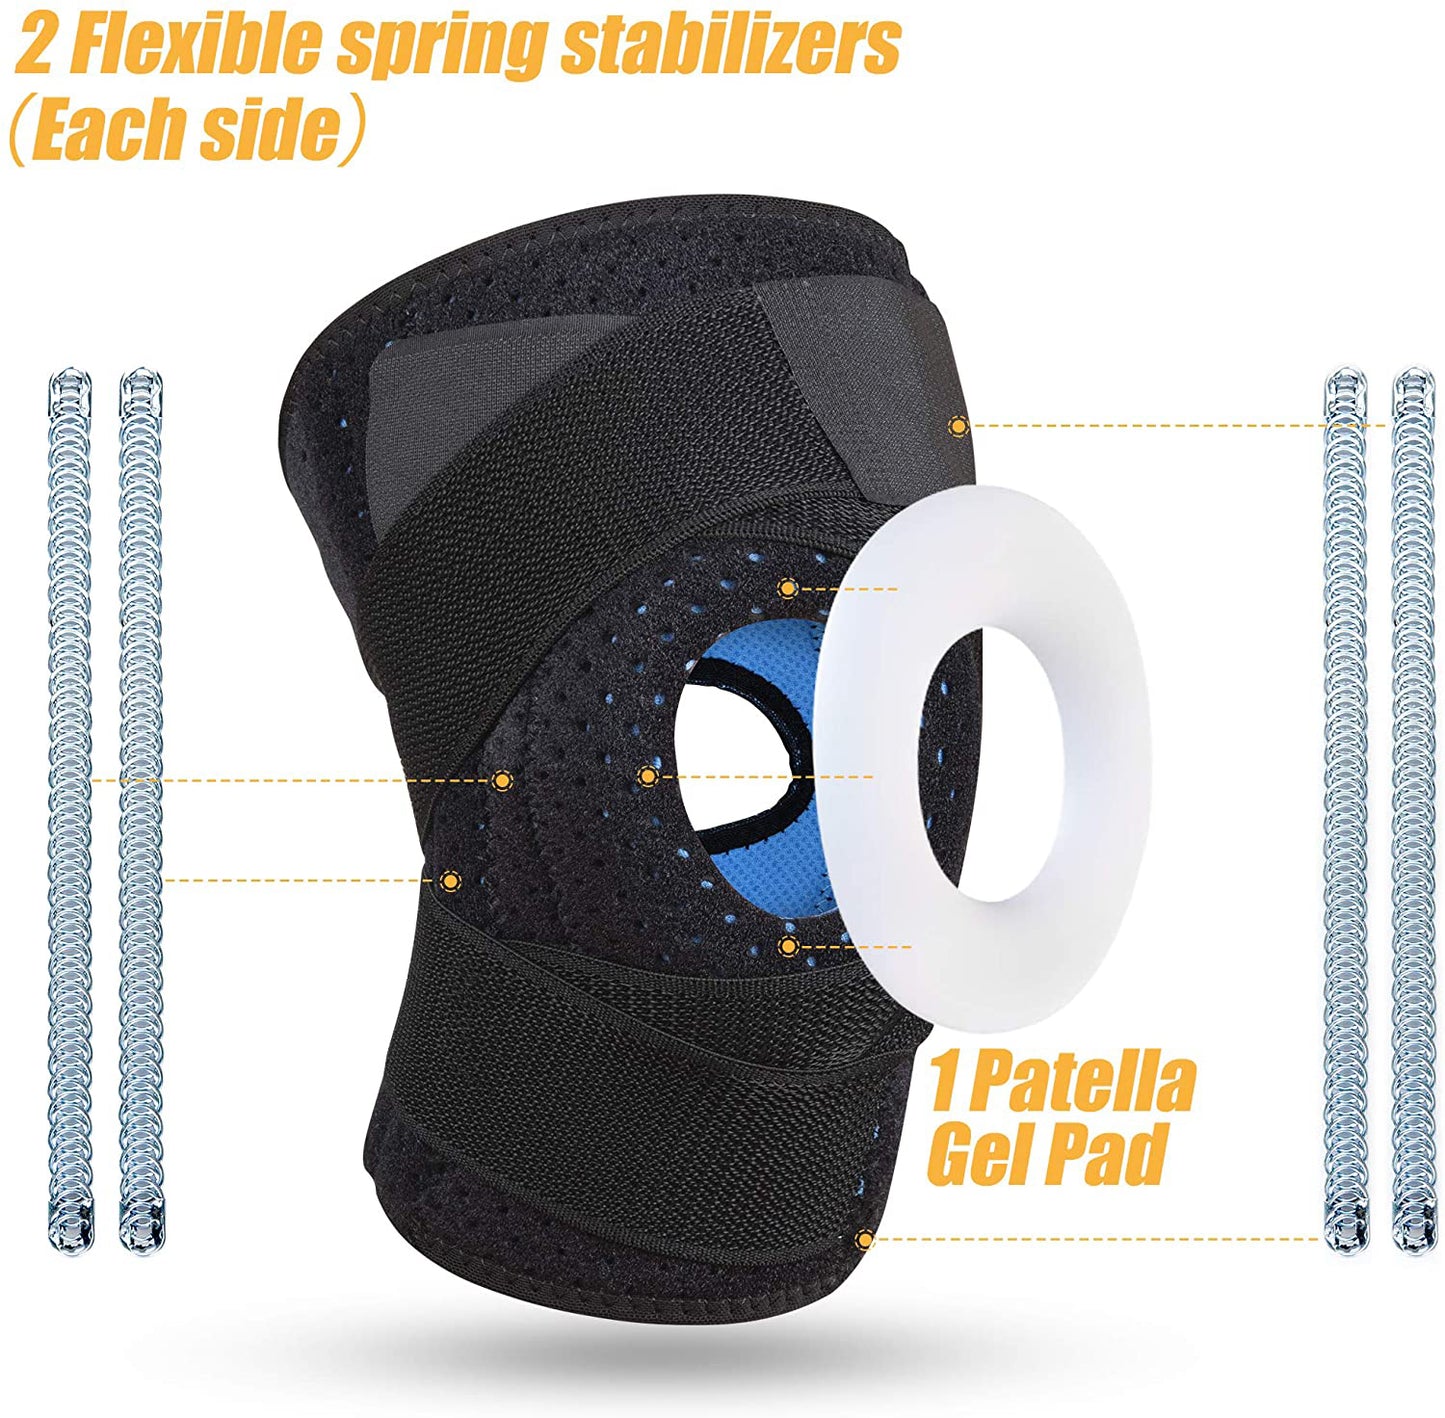 Knee Braces with Spring Stabilizers & Gel Patella Pad for Knee Support – Adjustable Compression Wrap for Running, Arthritis, Meniscus, Tear for Men & Women